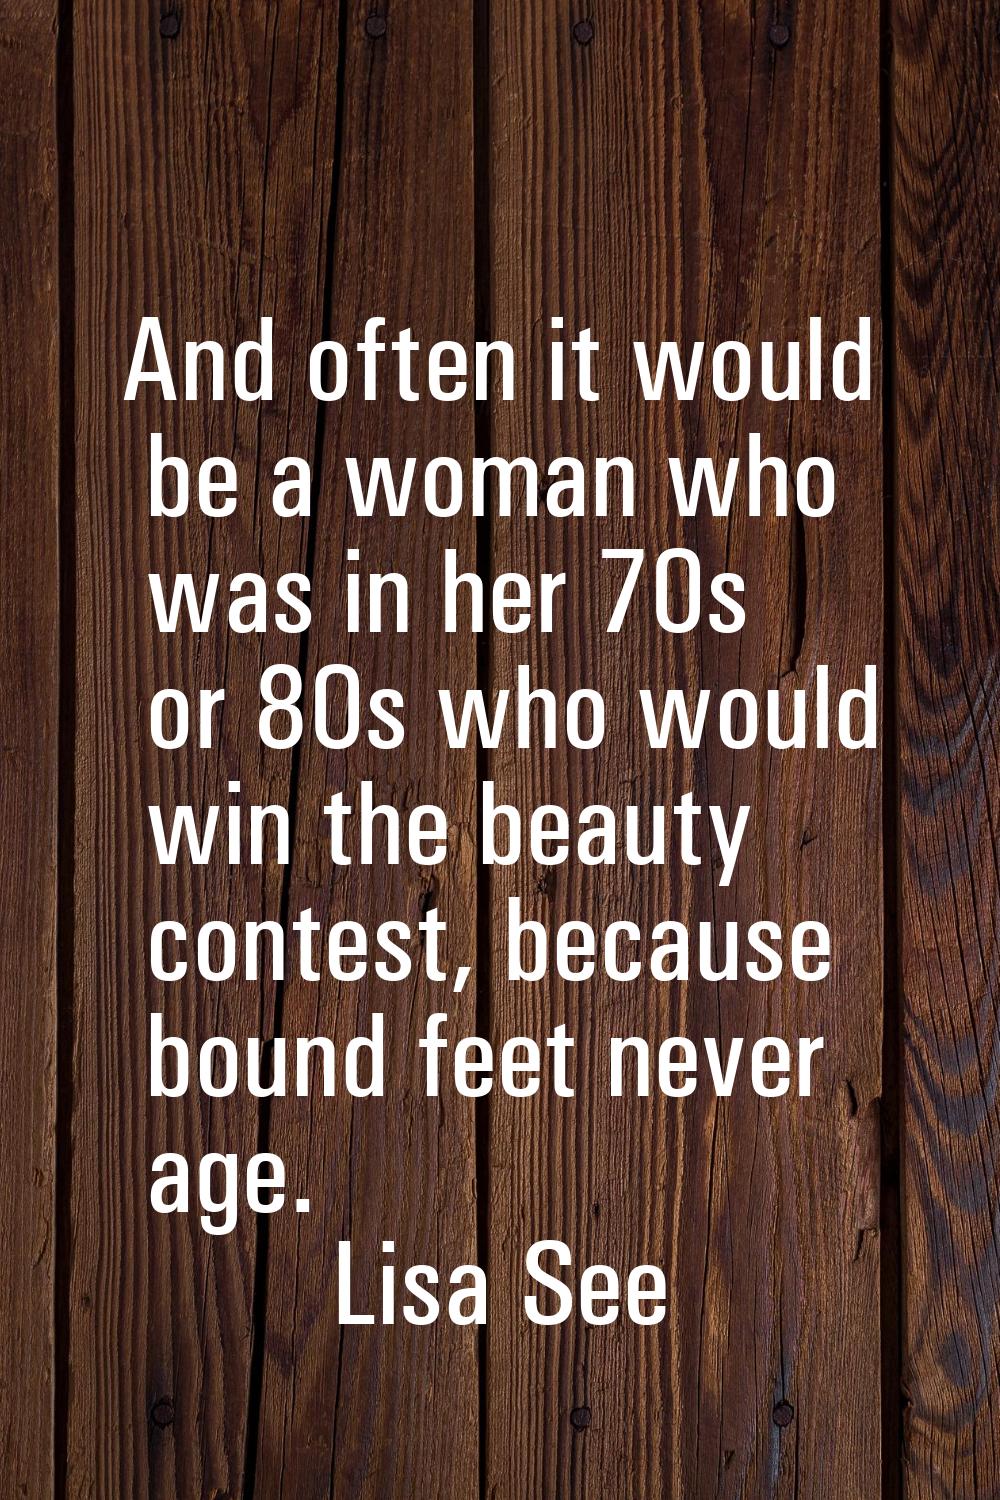 And often it would be a woman who was in her 70s or 80s who would win the beauty contest, because b